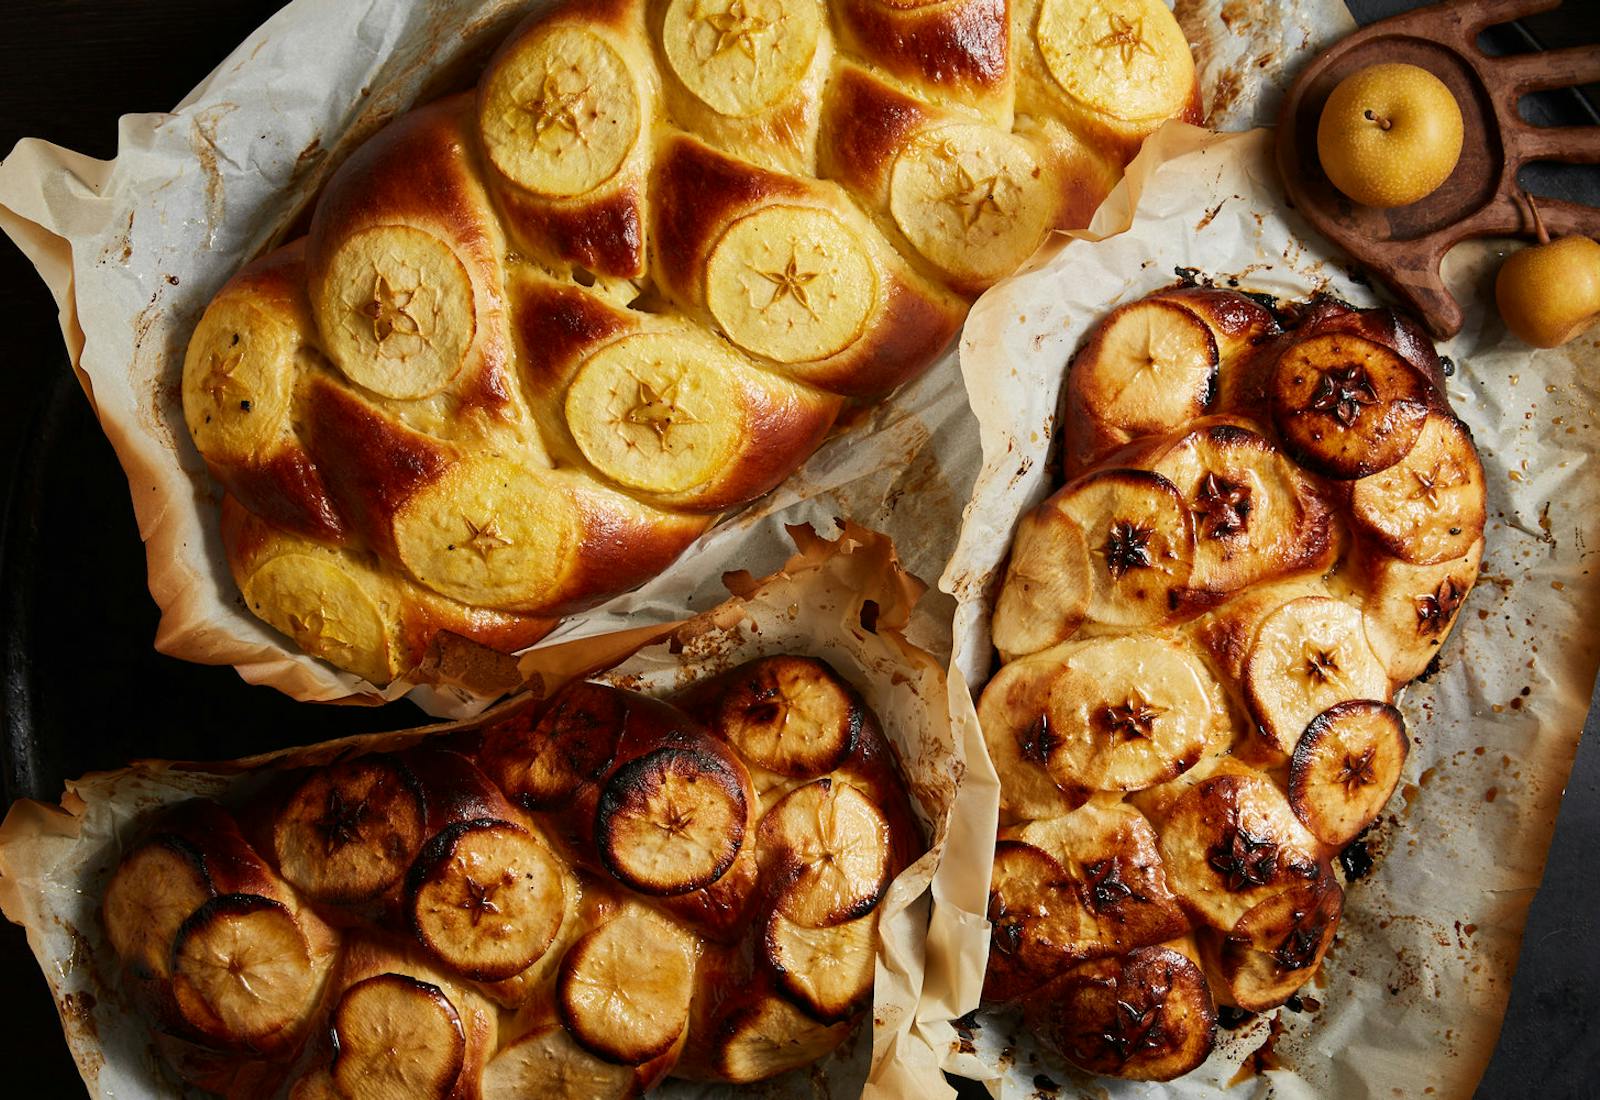 Loaves of challah woven with sliced apples on browned parchment paper alongside fresh apples.